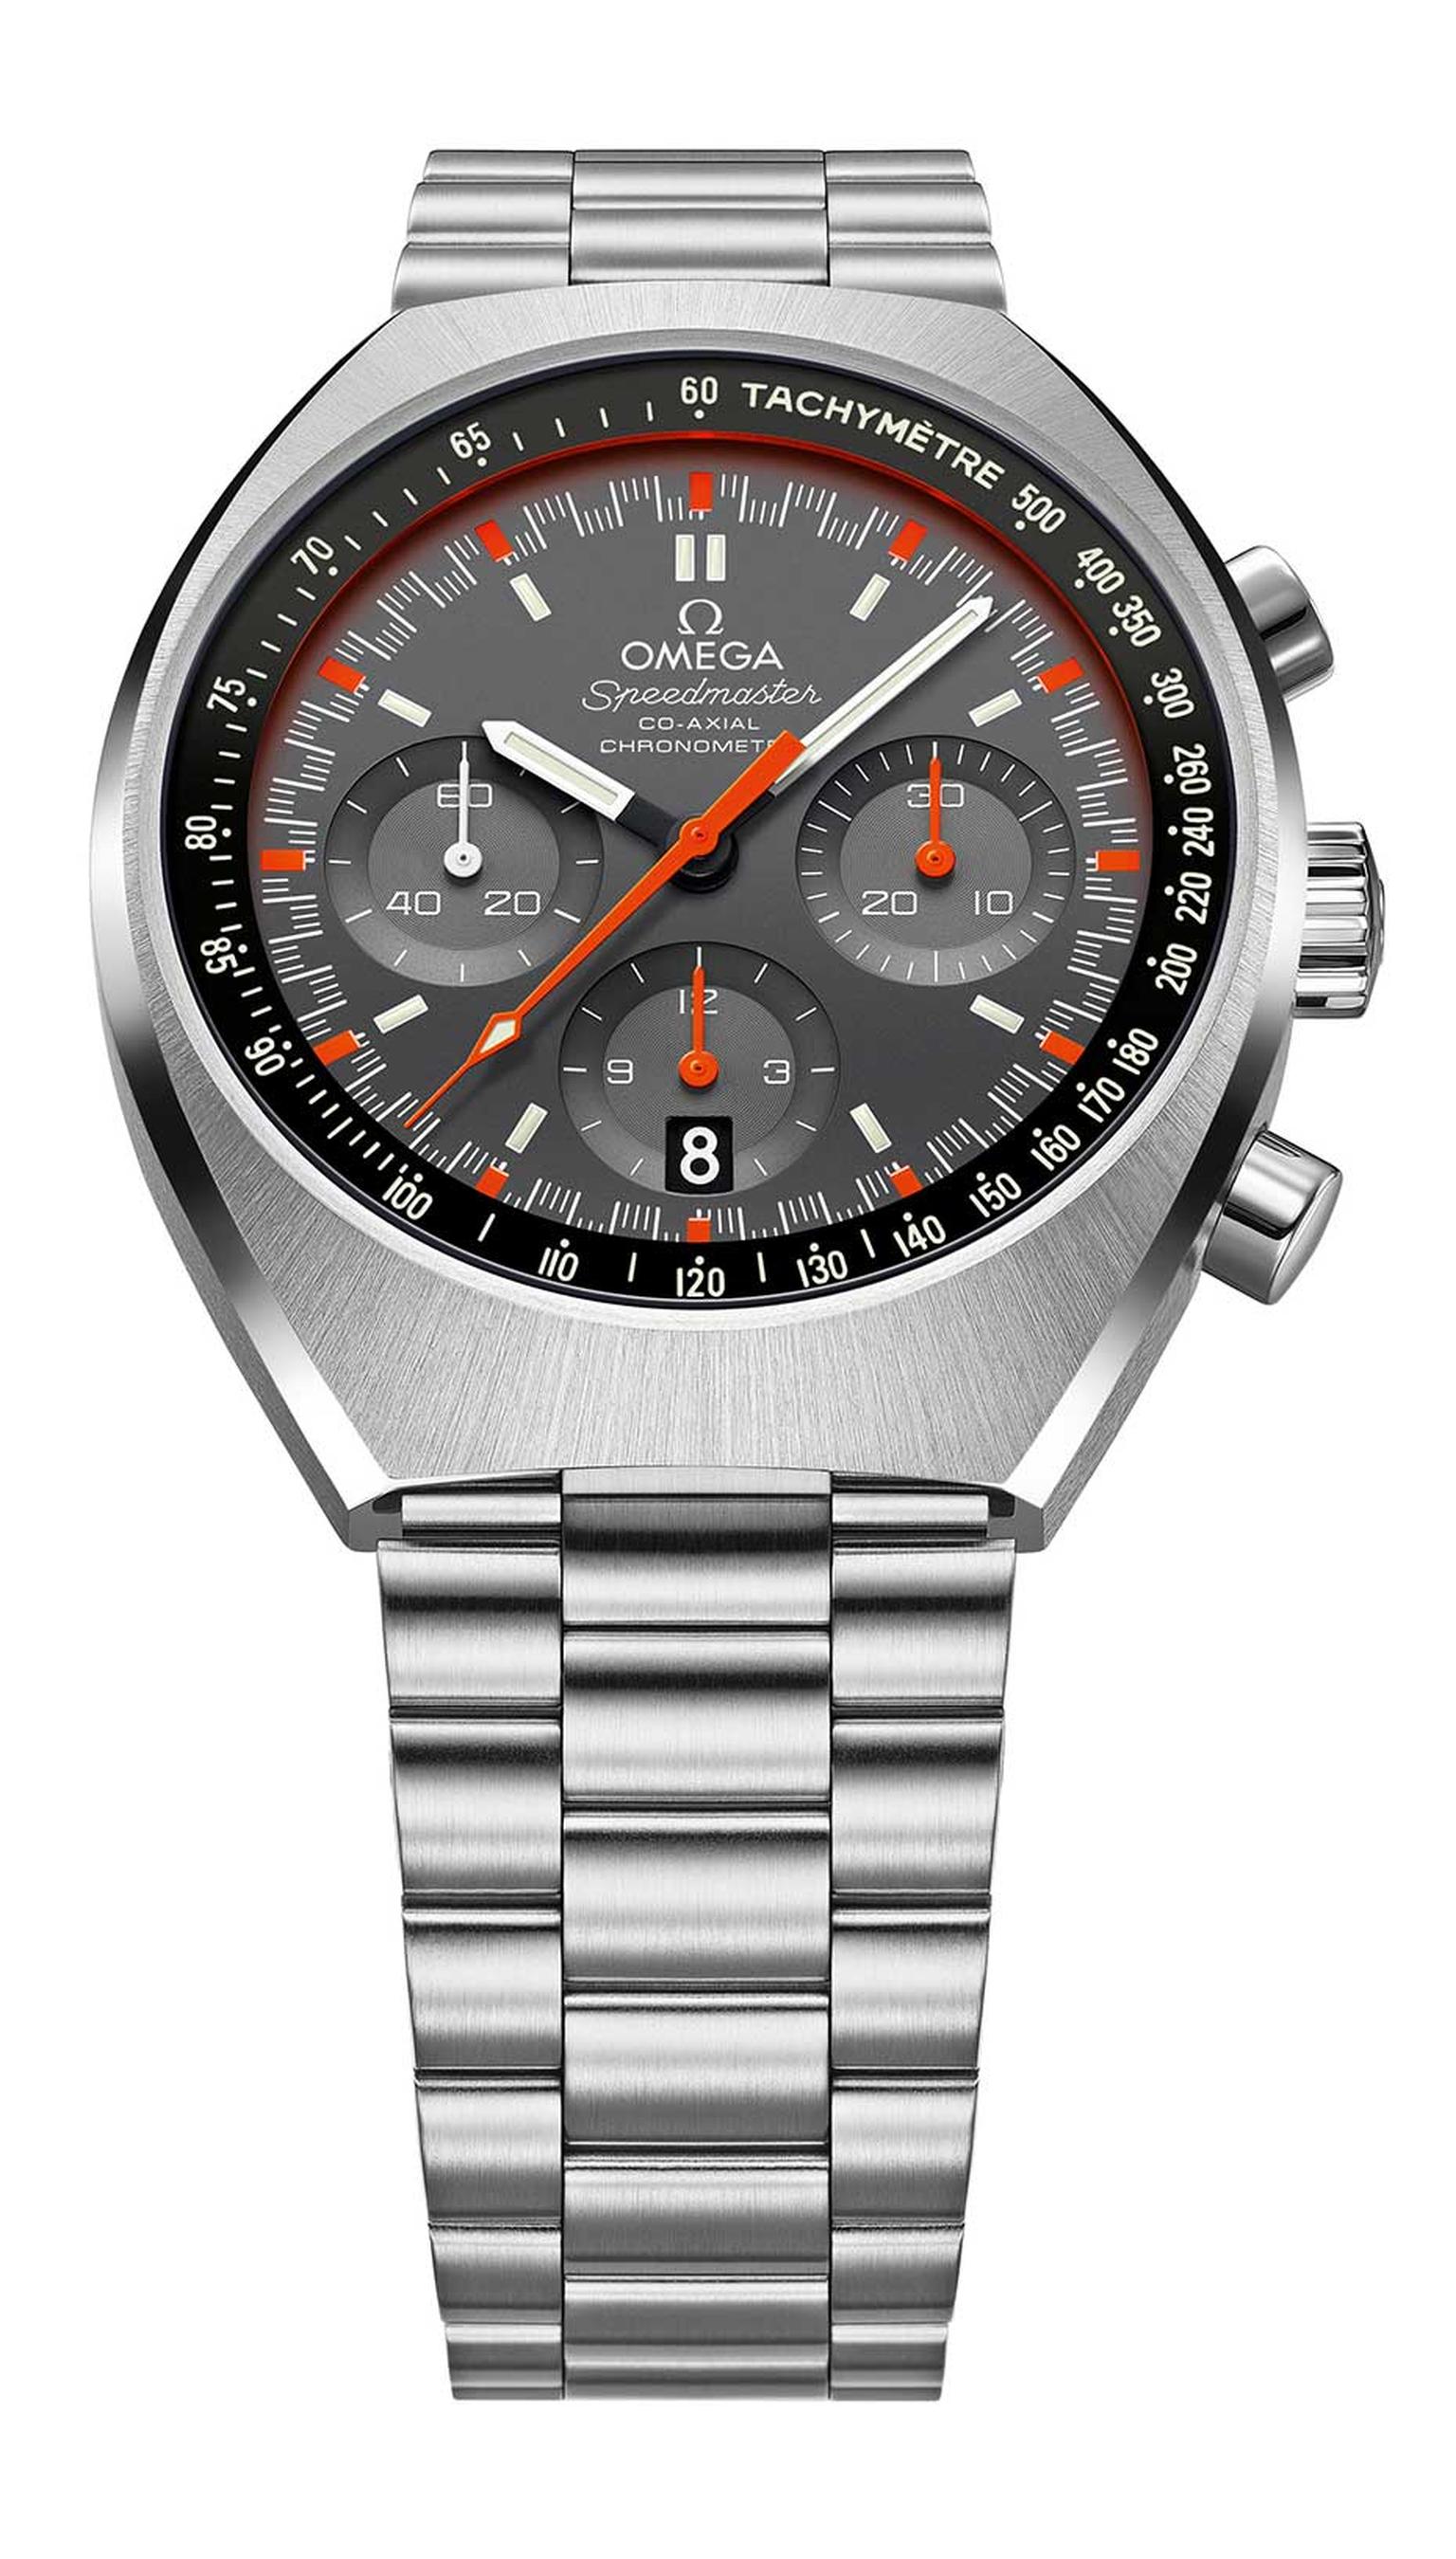 The late 60s and 70s are now considered 'vintage years' for watch design, and Omega's new Speedmaster Mark II captures the era perfectly, with its elongated barrel-shaped stainless steel case and fluorescent orange chronograph seconds hand with matching m